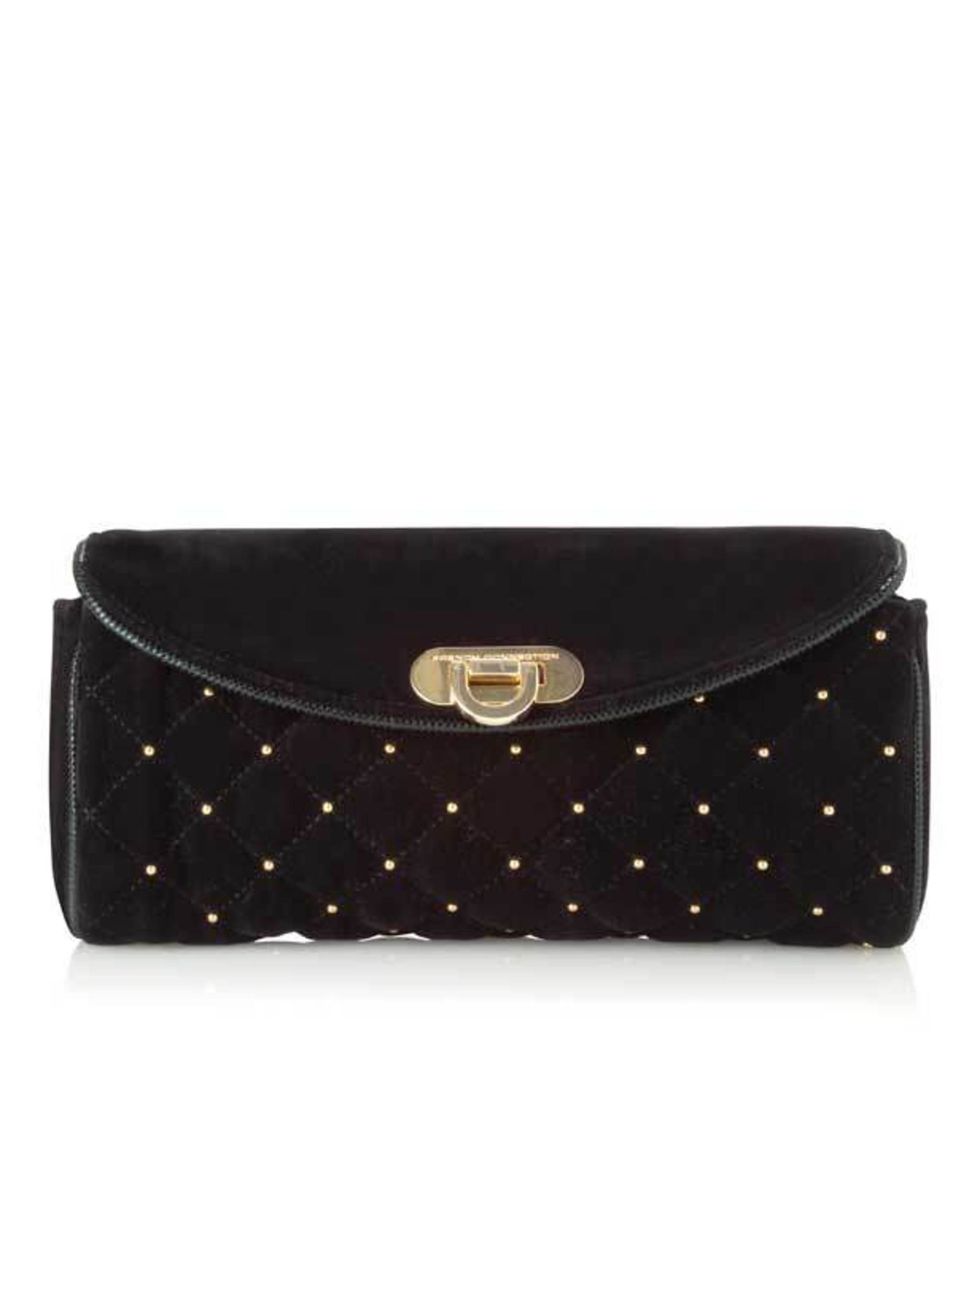 <p> <a href="http://www.frenchconnection.com/product/Woman+Collections+Accessories/SBOL4/Velvet+Stud+Clutch+Bag.htm">French Connection</a> velvet stud clutch, £33</p>